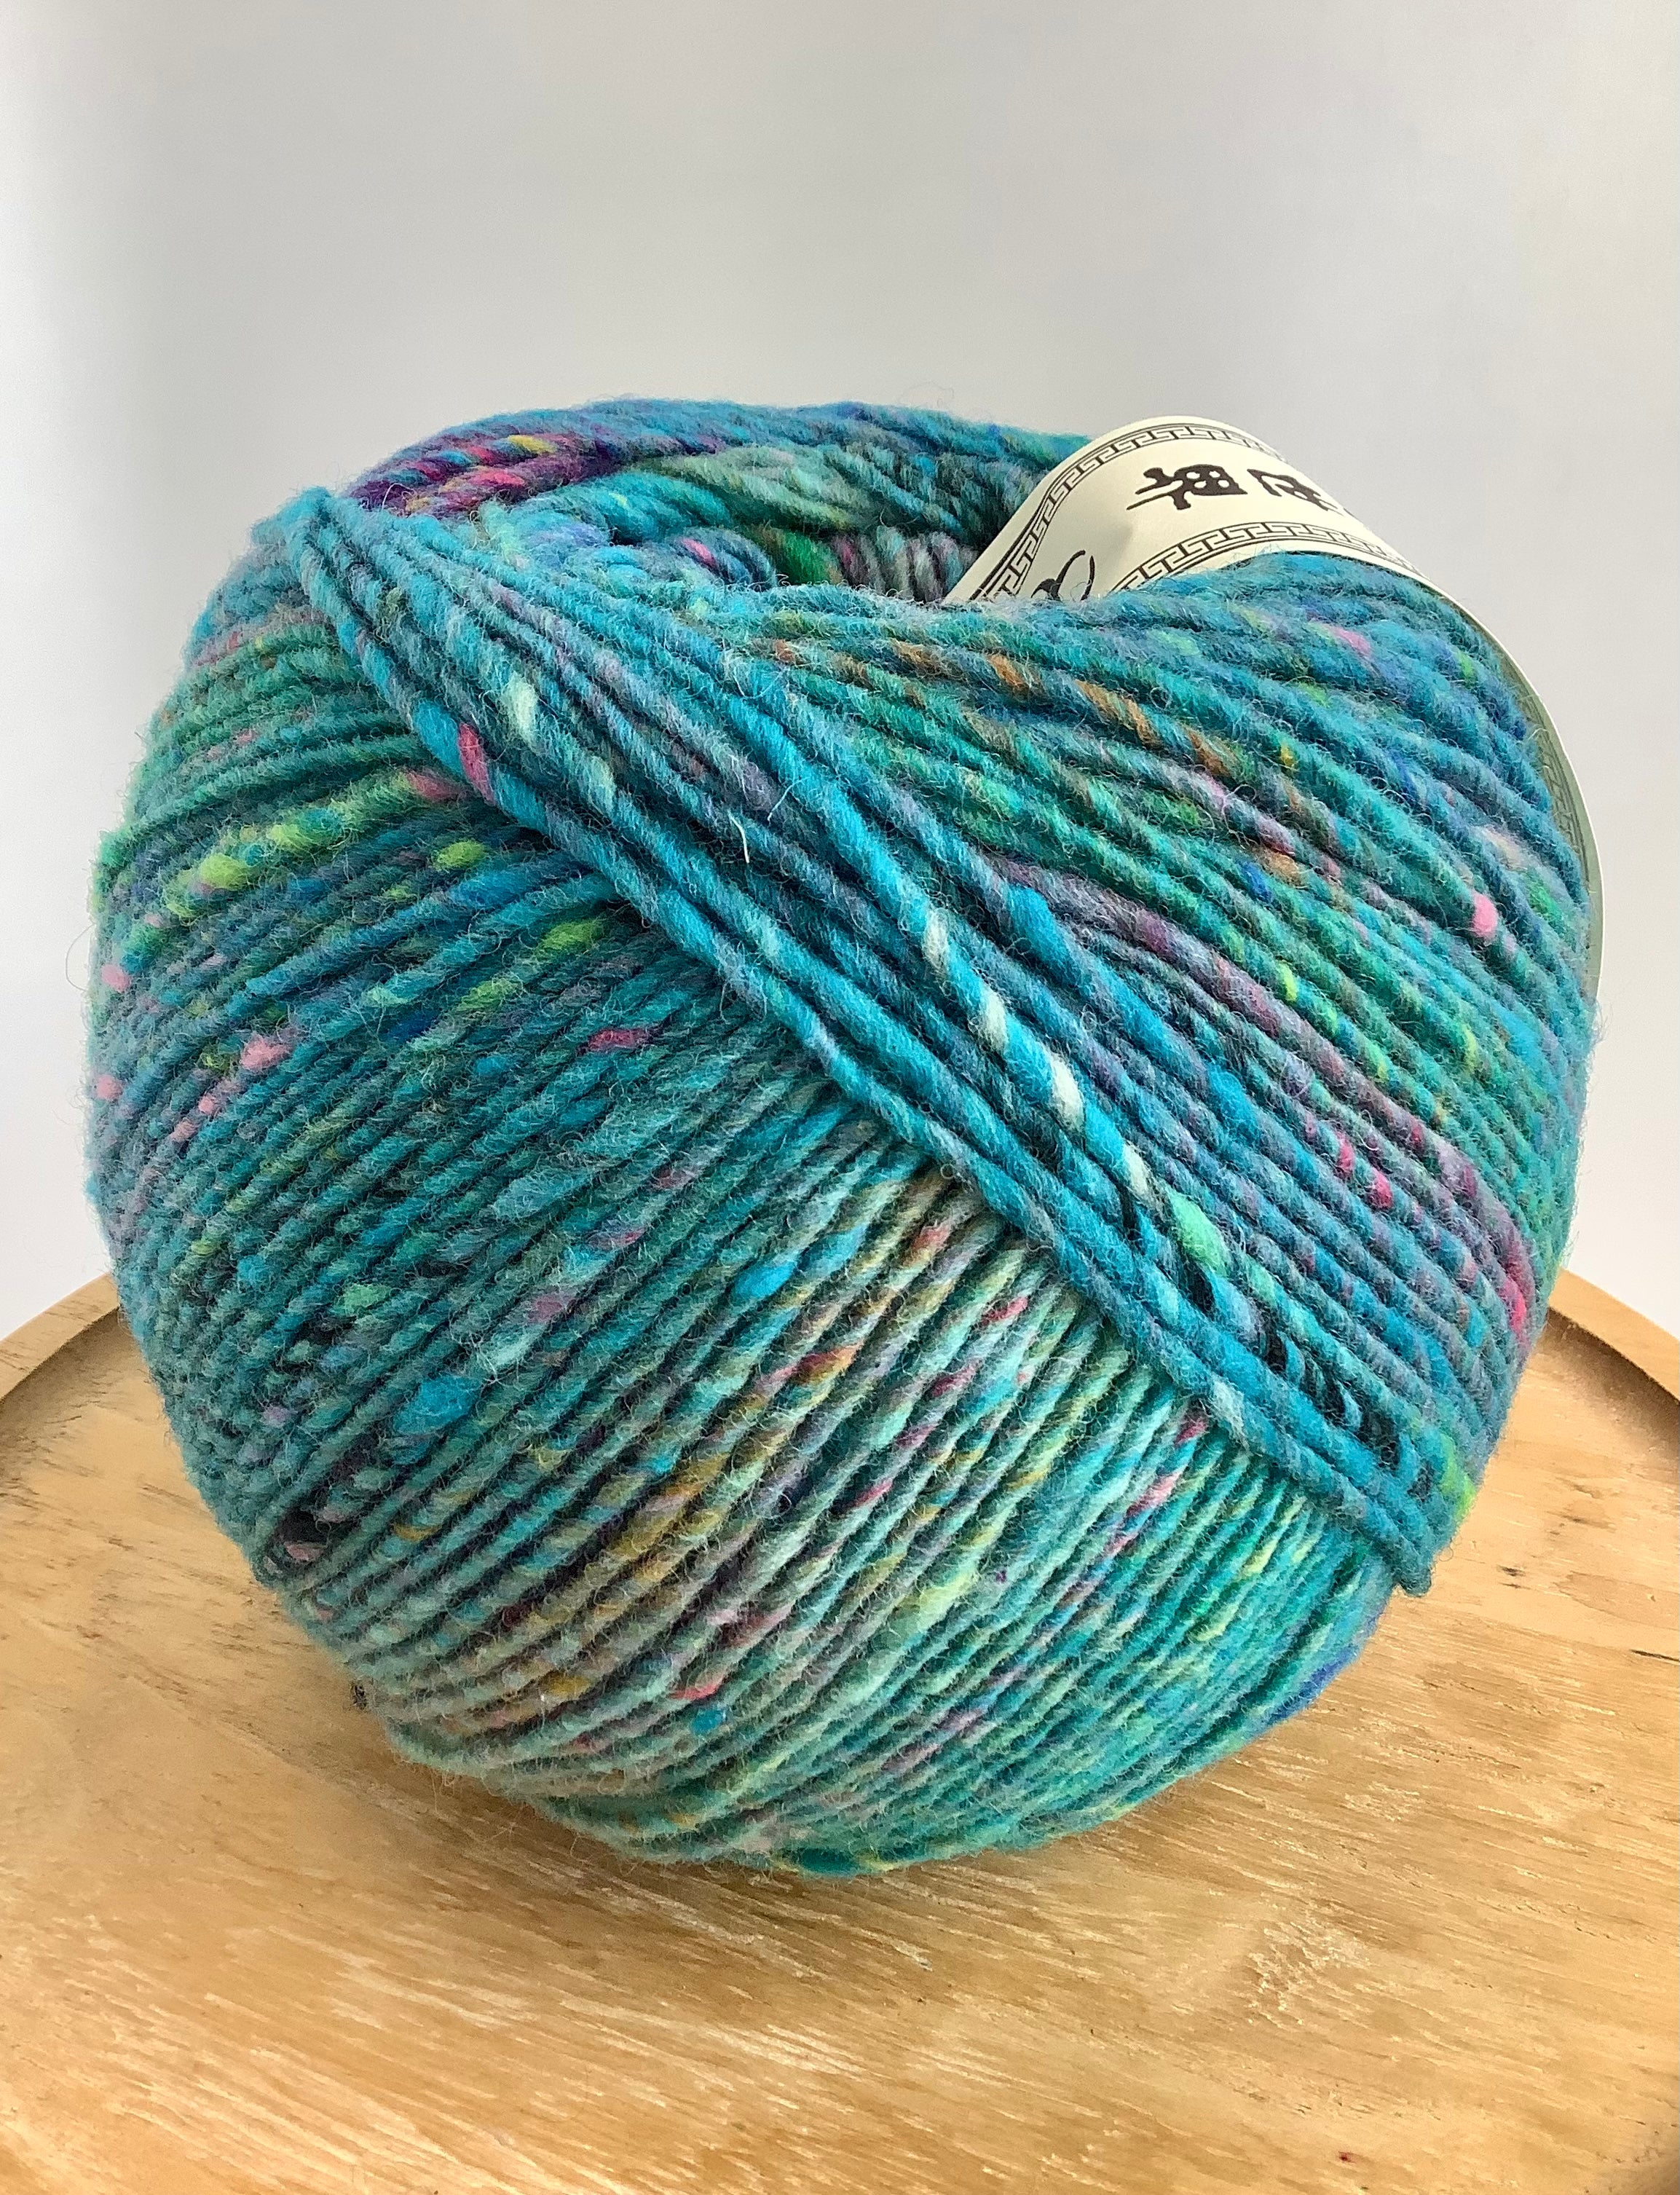 Viola from Noro